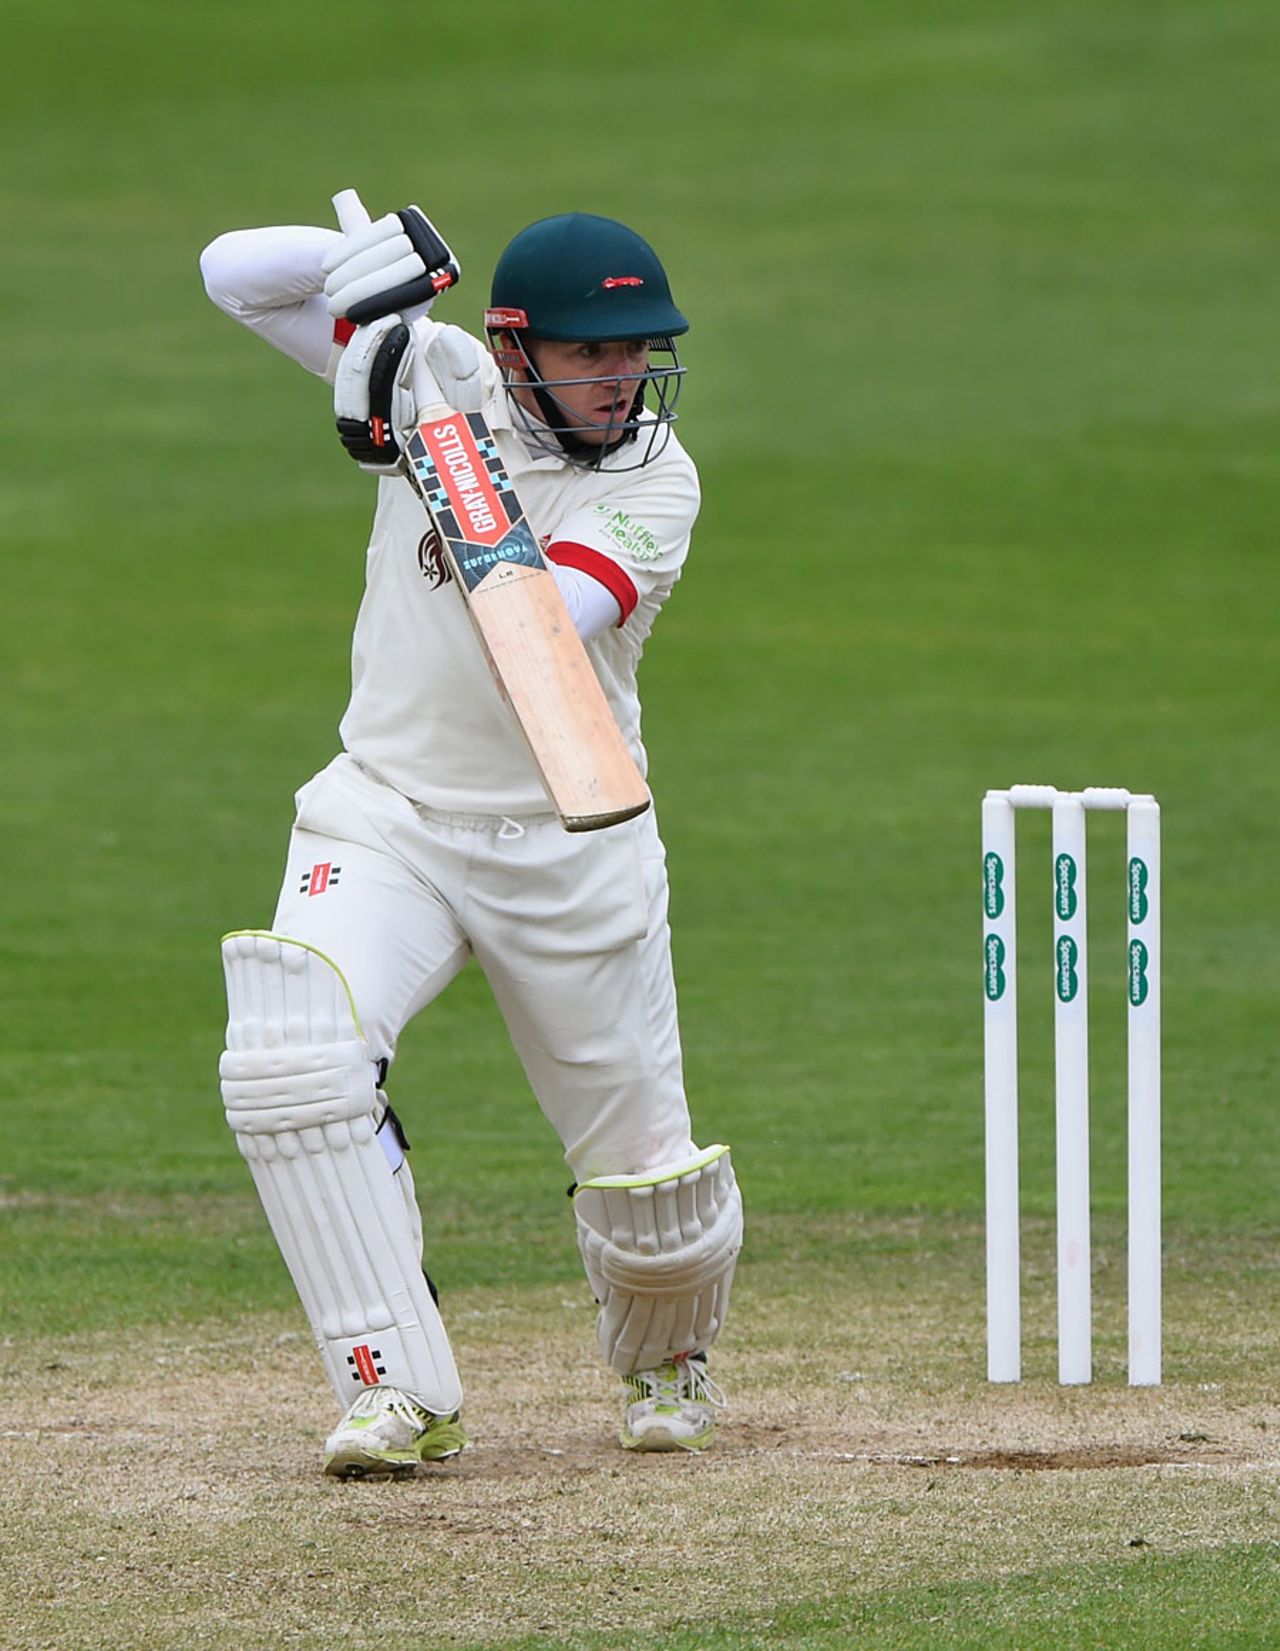 Niall O'Brien's 93 enable Leicestershire close in on Glamorgan's score, Glamorgan v Leicestershire, Specsavers County Championship, Division Two, Cardiff, 2nd day, April 18, 2016